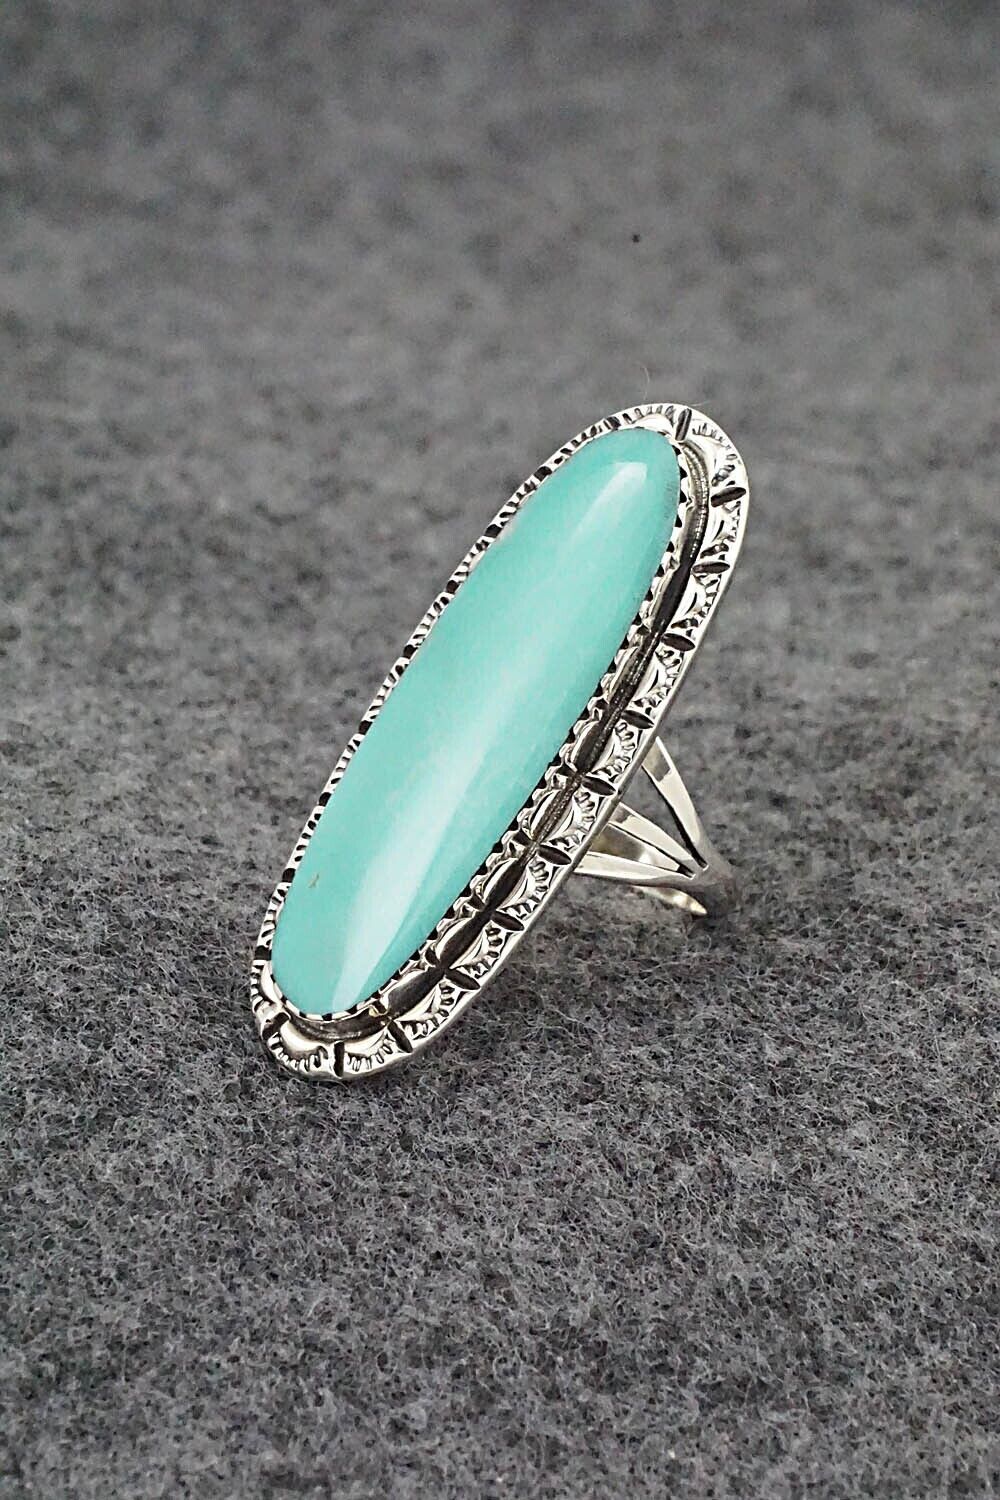 Turquoise & Sterling Silver Ring - Mike Smith - Size 5